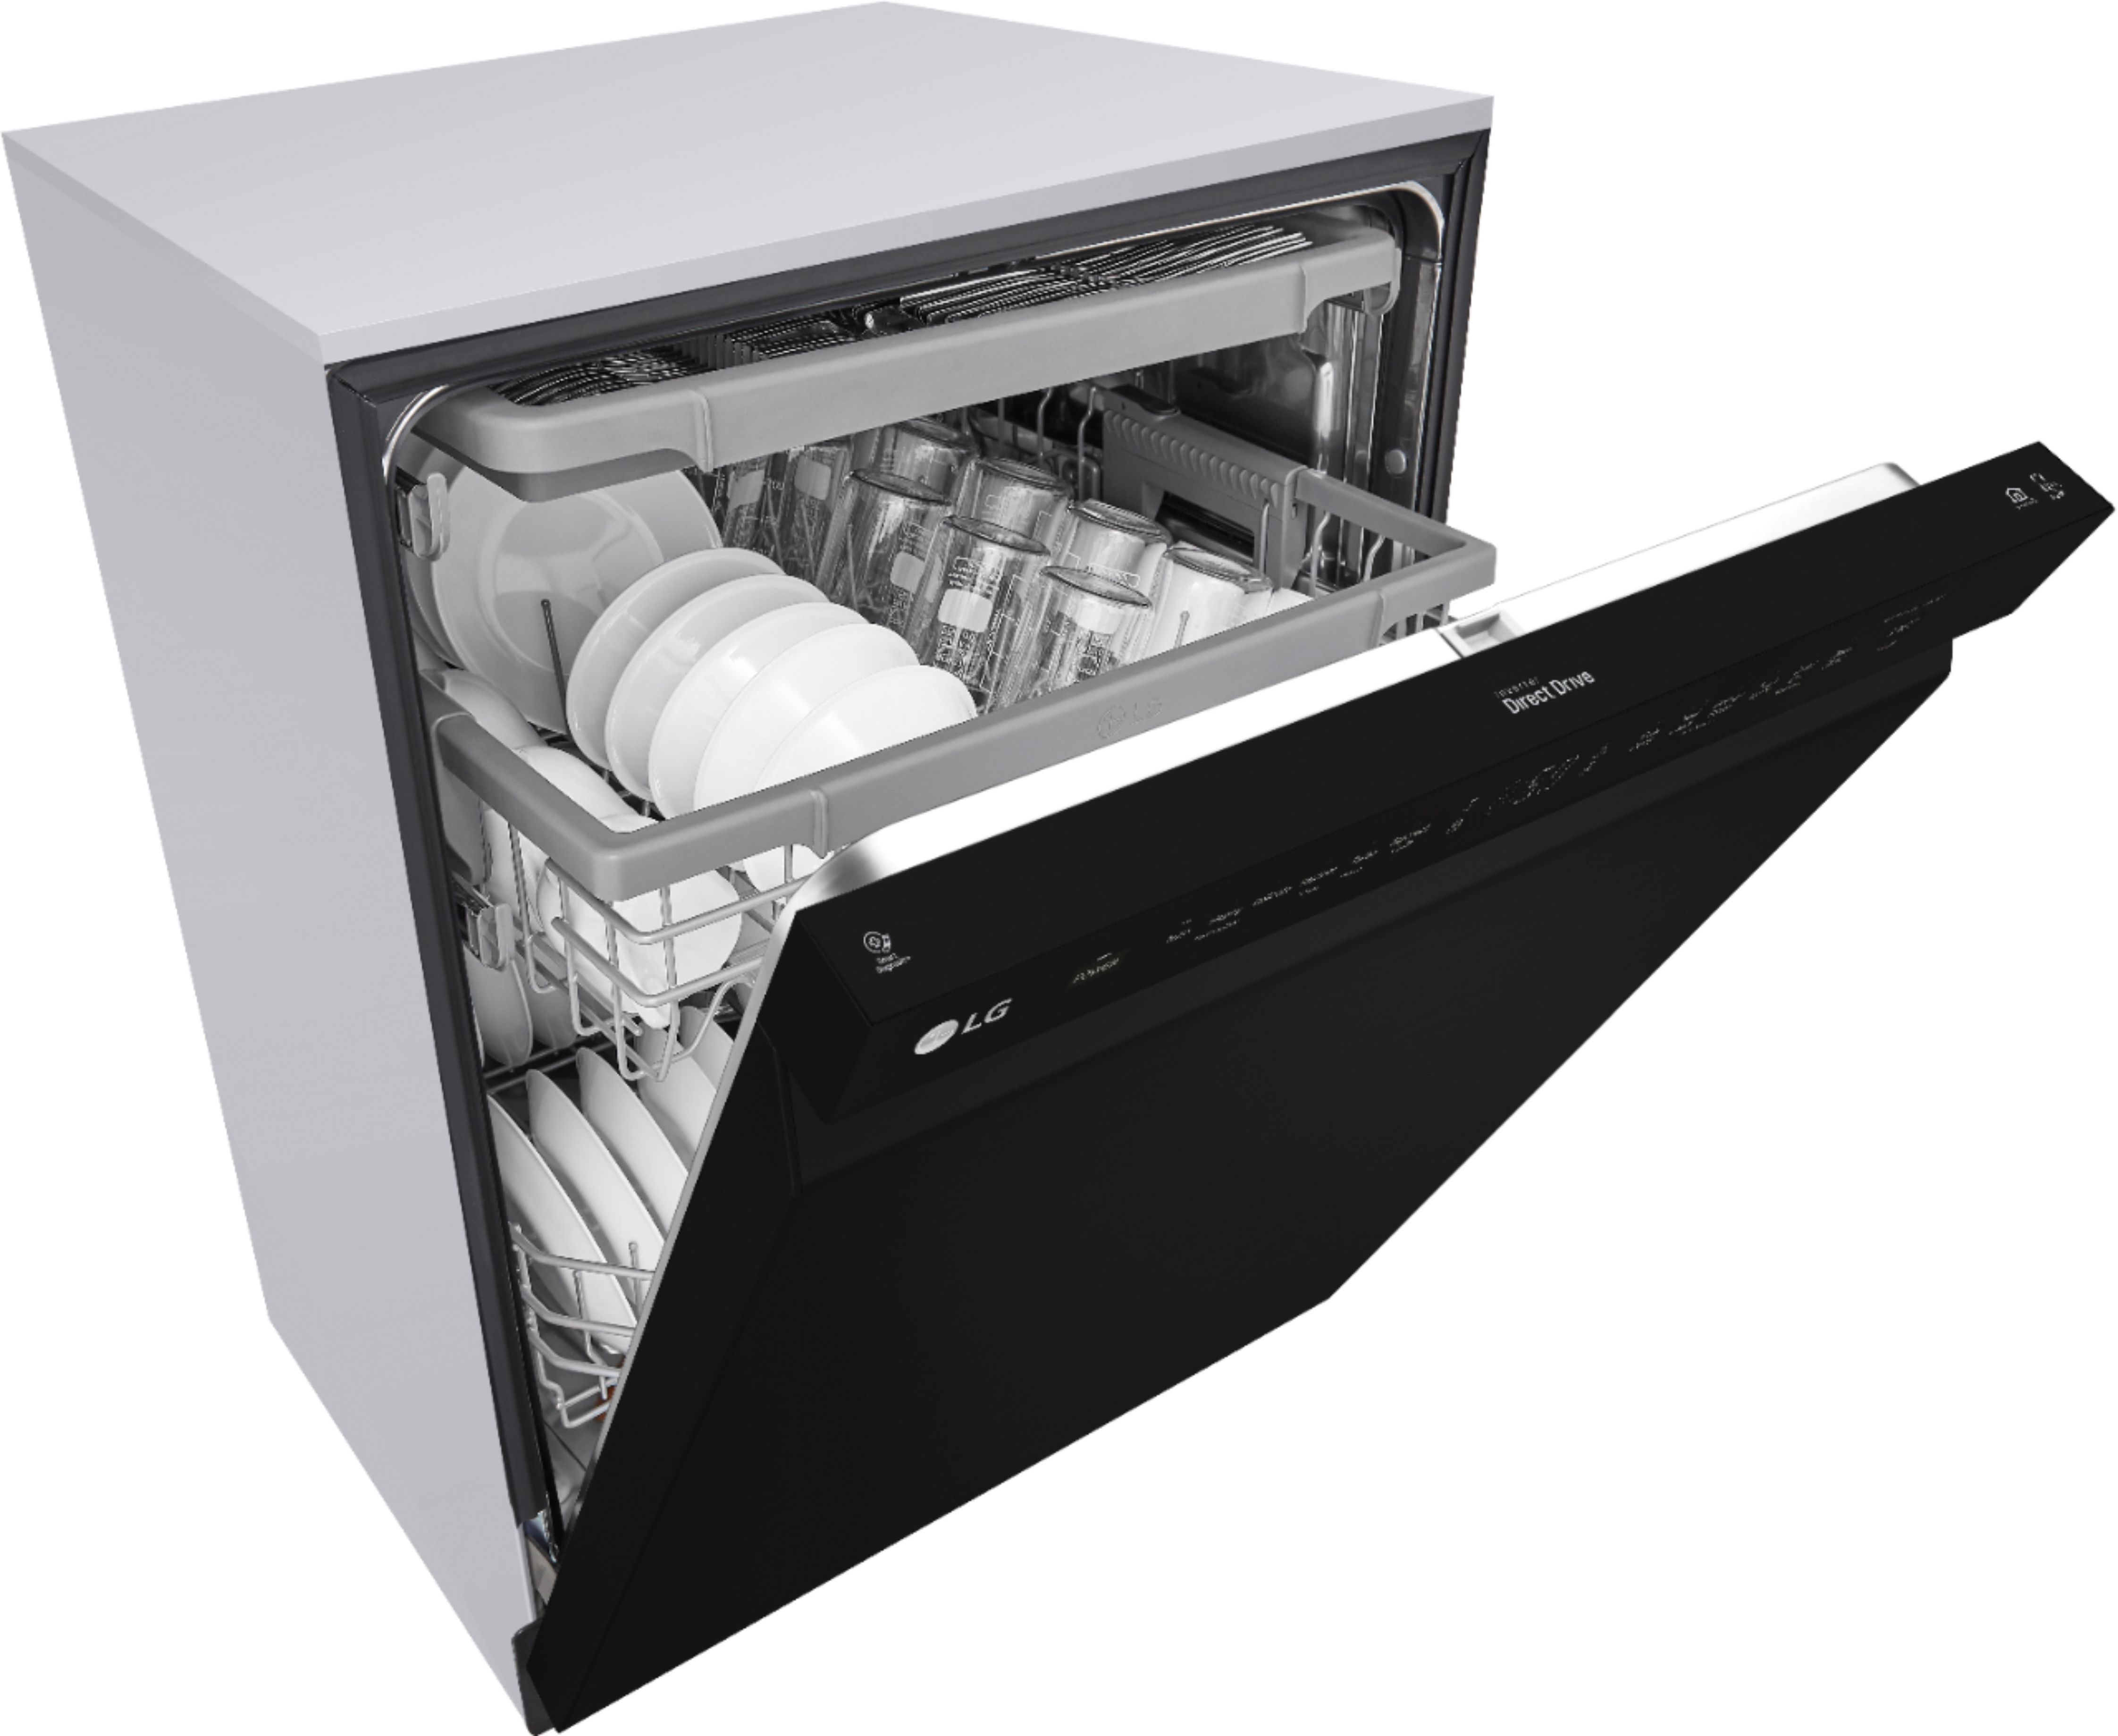 Angle View: LG - 24" Front Control Smart Built-In Stainless Steel Tub Dishwasher with 3rd Rack, QuadWash, and 48dba - Black